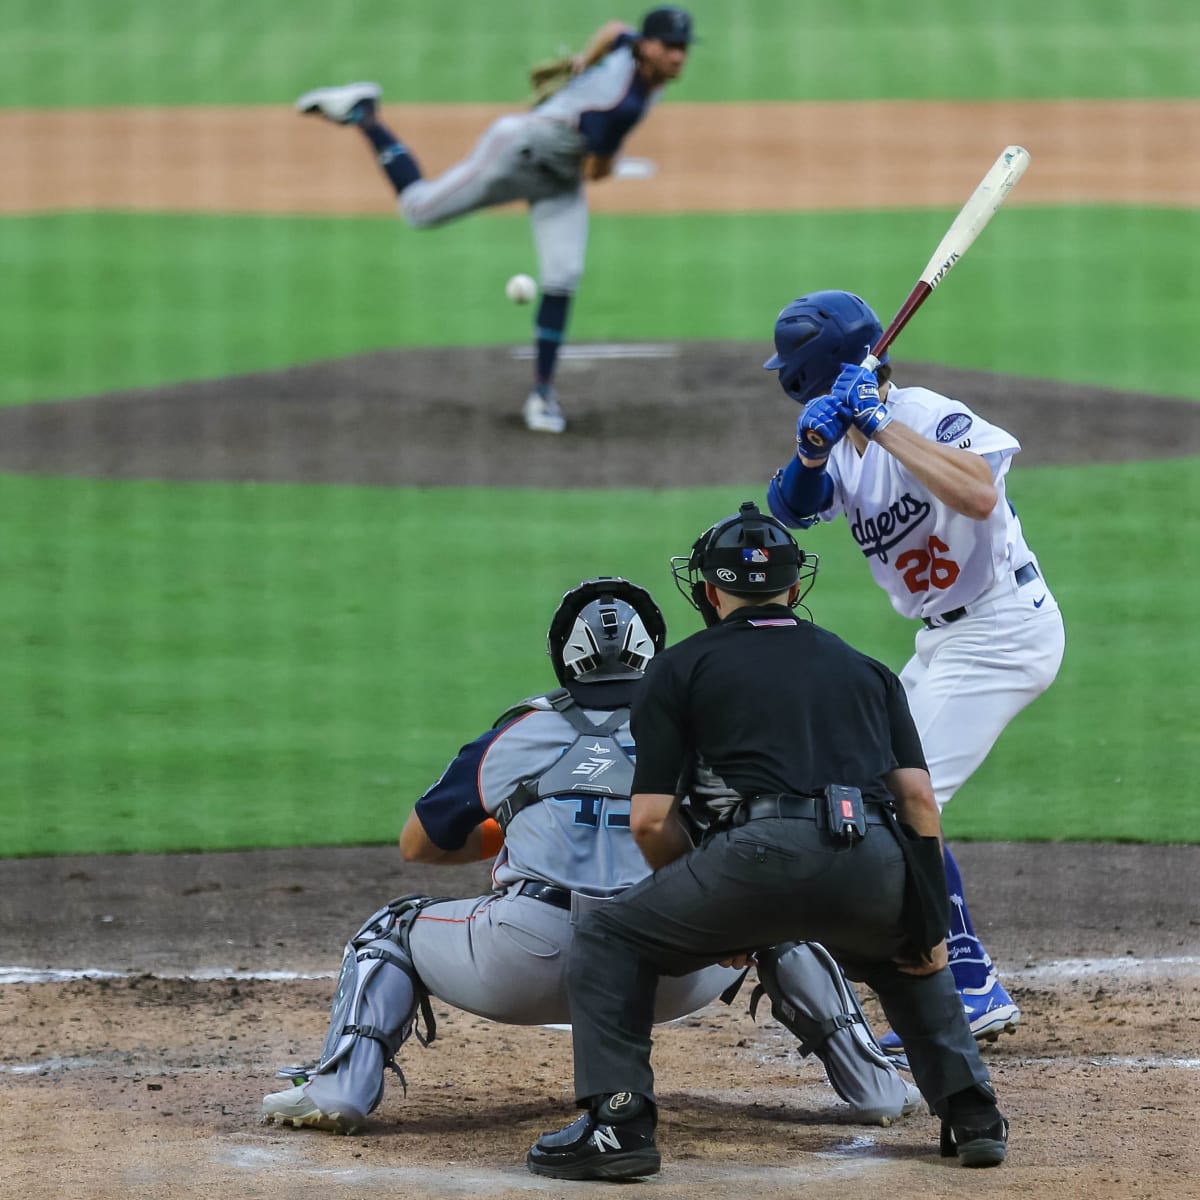 Dodgers at River Cats Free Live Stream Minor League Baseball - How to Watch and Stream Major League and College Sports